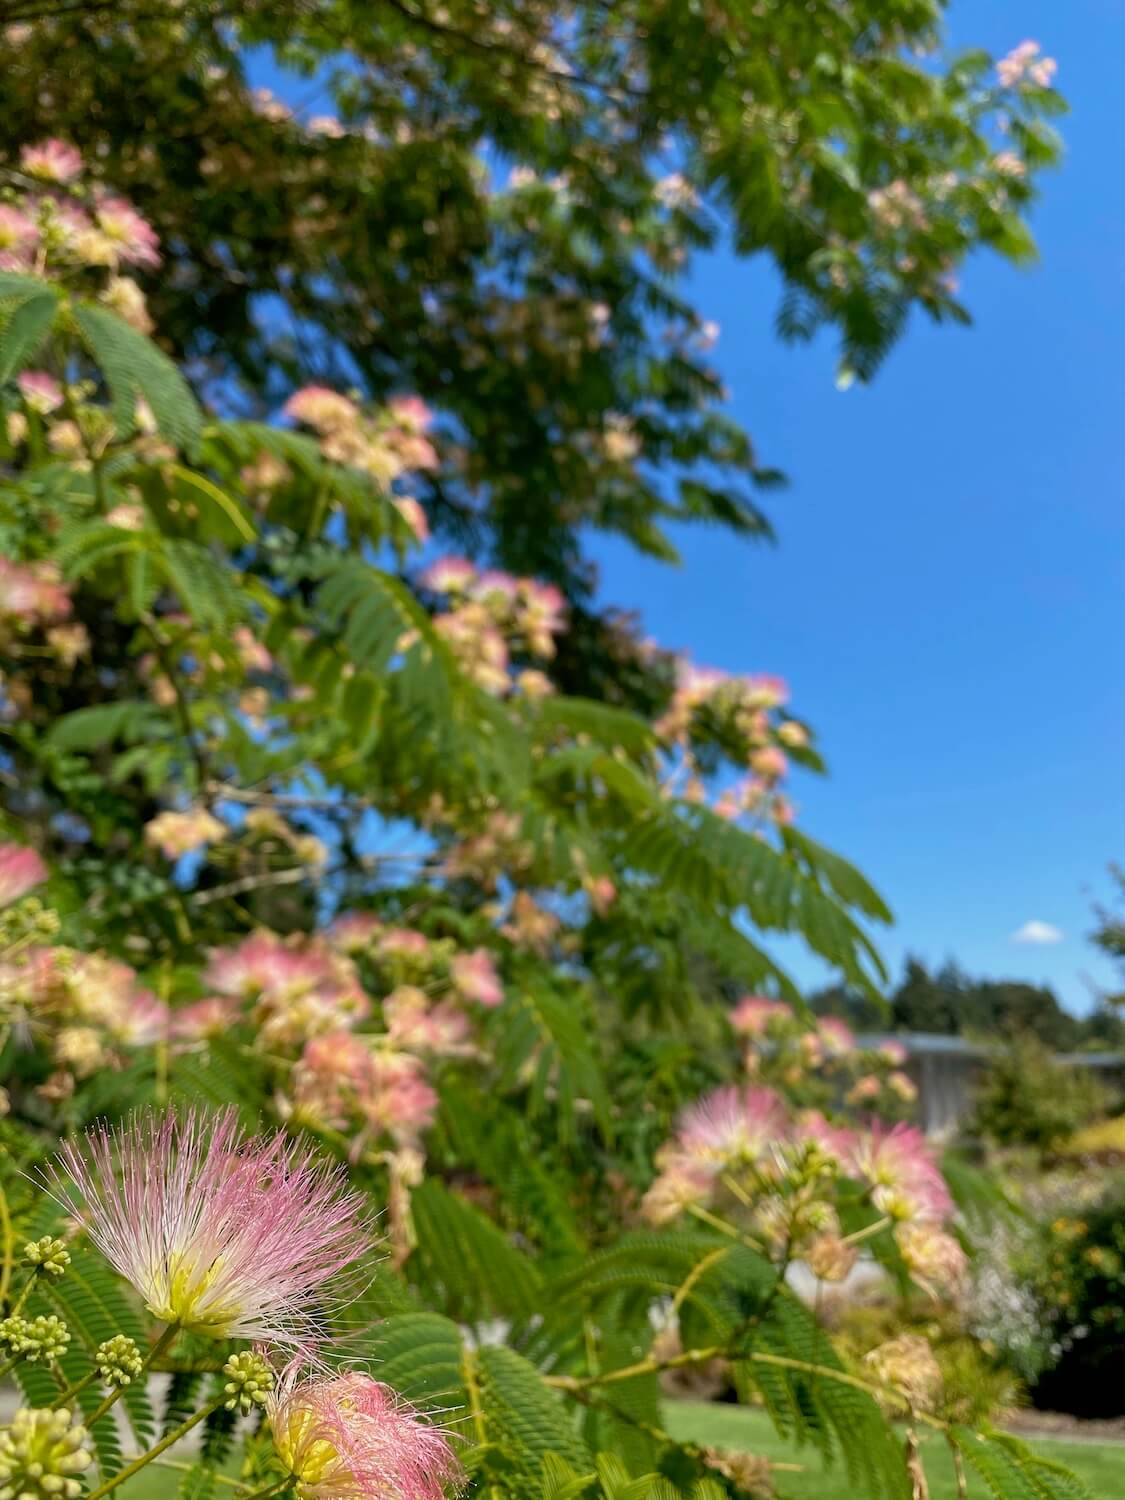 A delicate puff of pink with yellow center is up close and focused while the rest of the green tree branches fade into the bright blue sky.